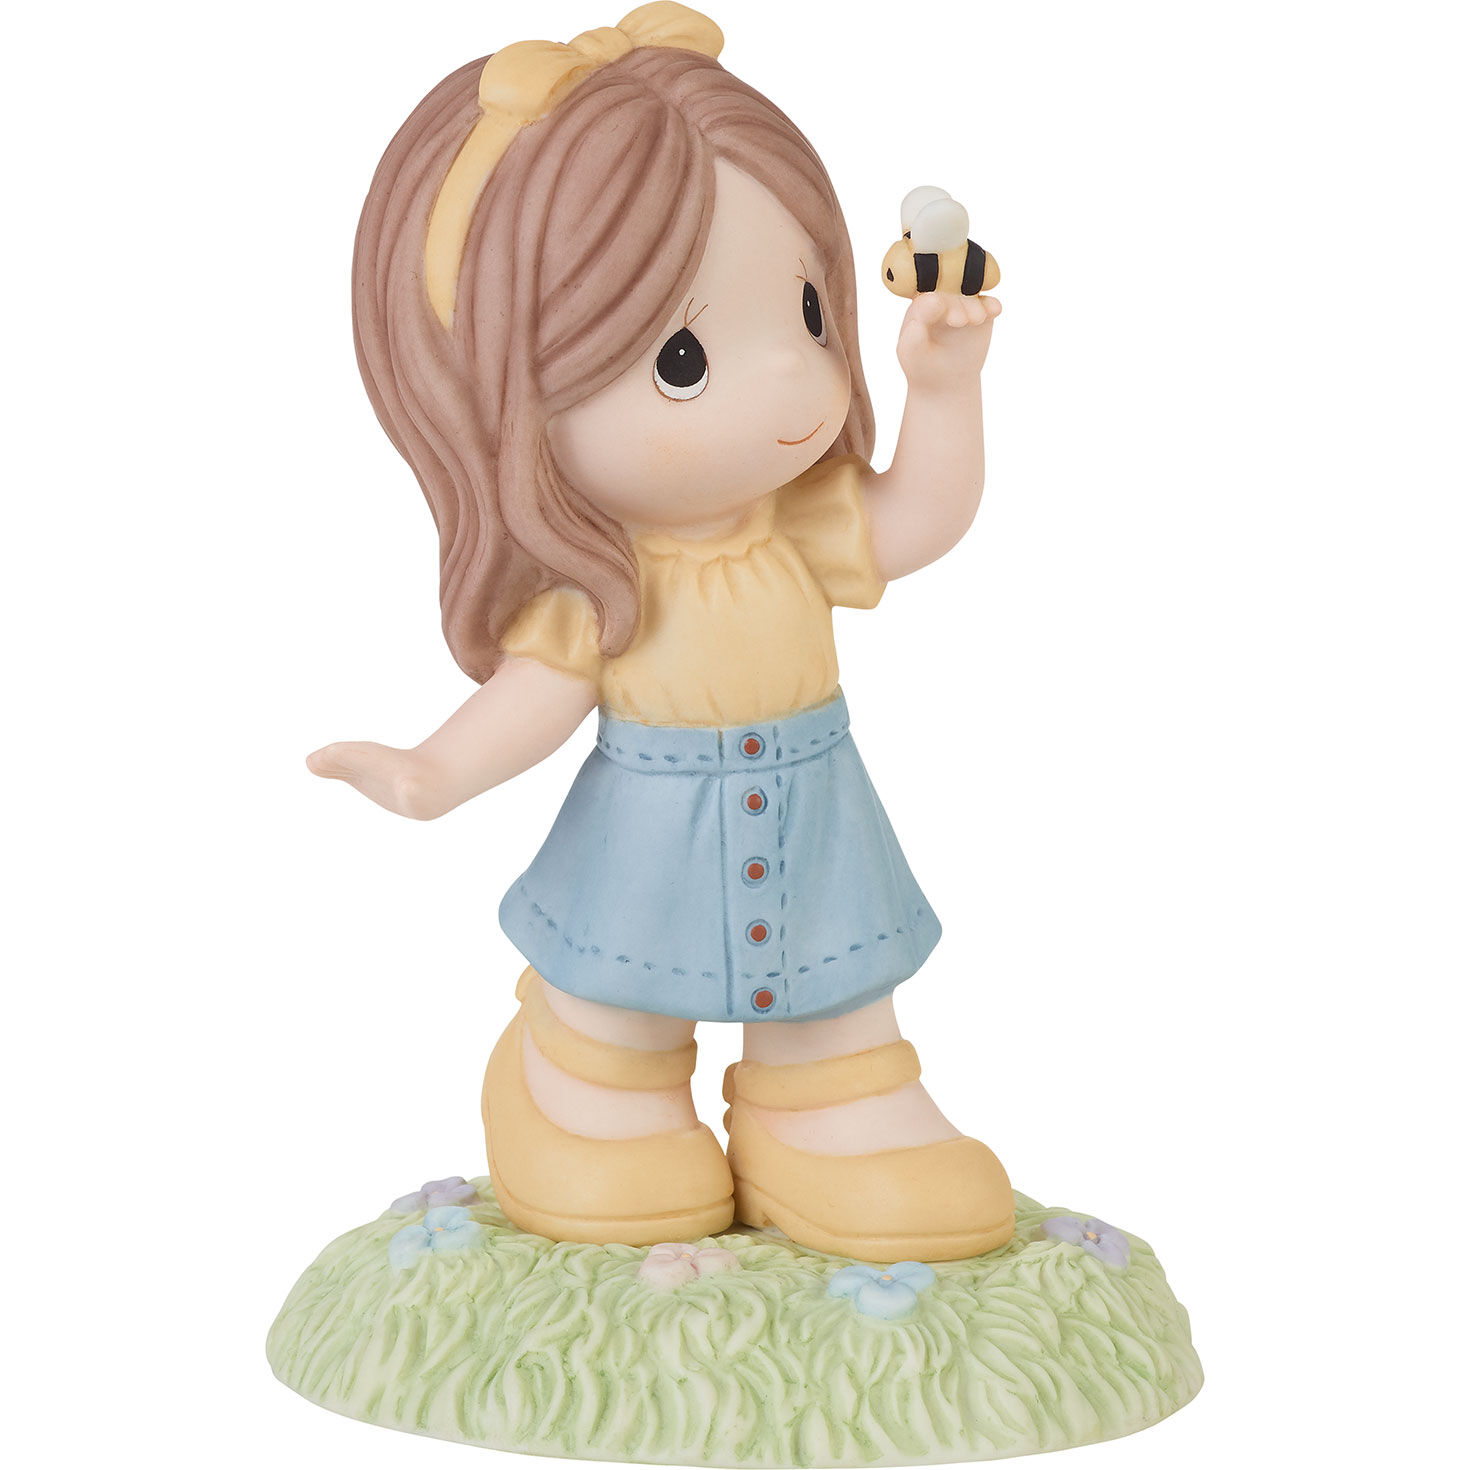 Precious Moments Just Bee Yourself Girl Figurine, 5.4" for only USD 46.99 | Hallmark